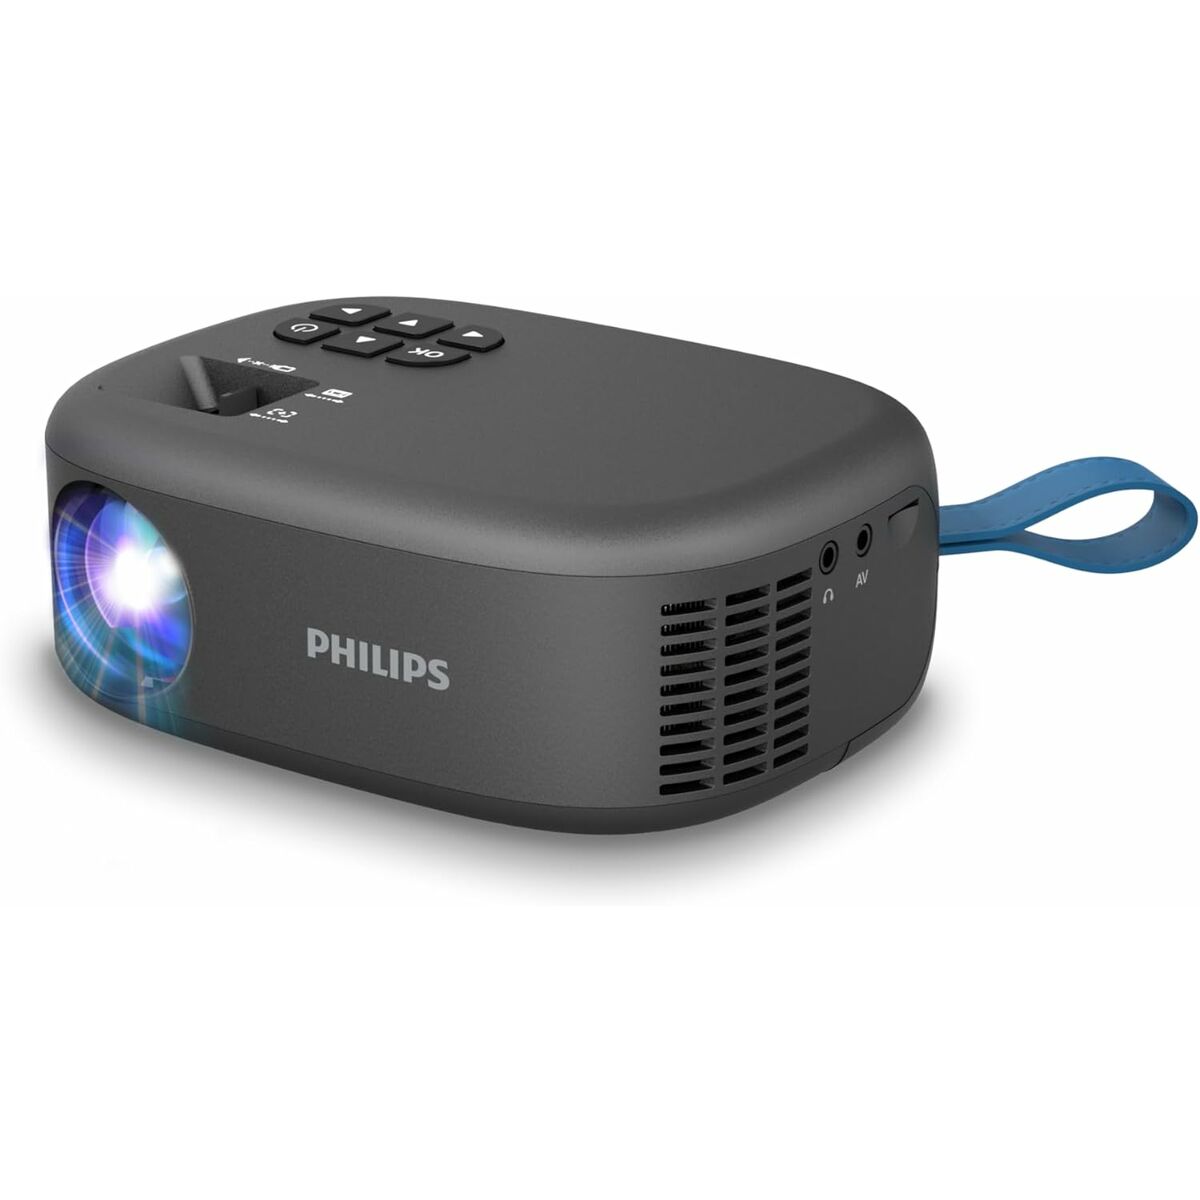 Projector Philips NEOPIX 113 HD, Philips, Electronics, TV, Video and home cinema, projector-philips-neopix-113-hd, Brand_Philips, category-reference-2609, category-reference-2642, category-reference-2947, category-reference-t-18805, category-reference-t-18811, category-reference-t-19653, cinema and television, computers / peripherals, Condition_NEW, entertainment, office, Price_100 - 200, RiotNook